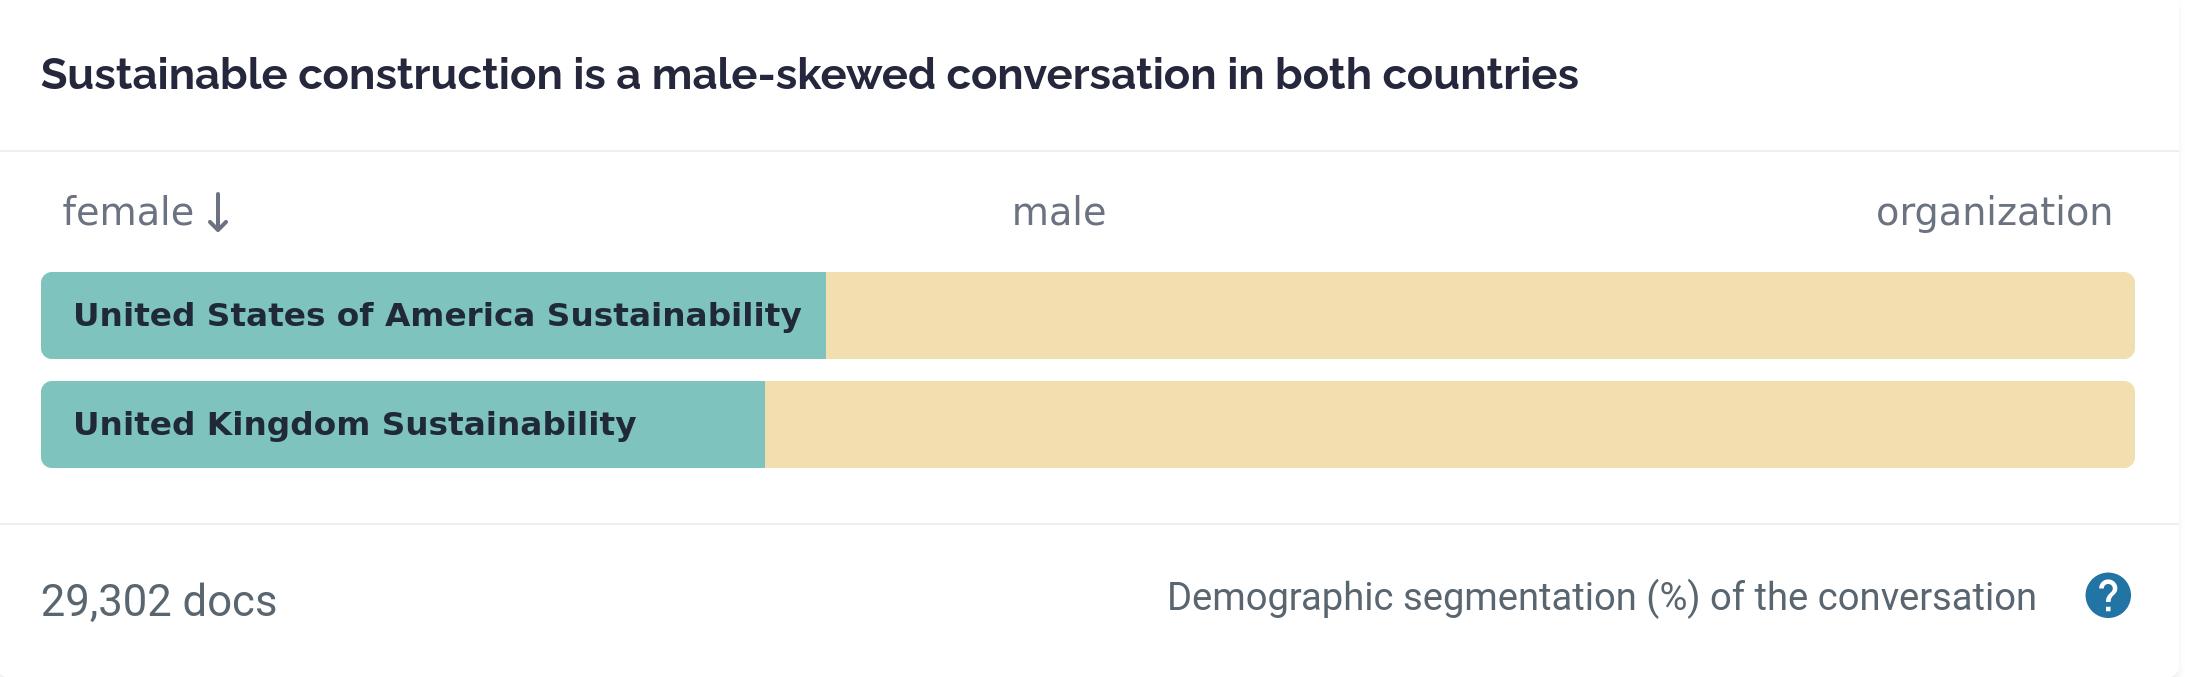 Sustainable construction is a male-skewed conversation in both countries